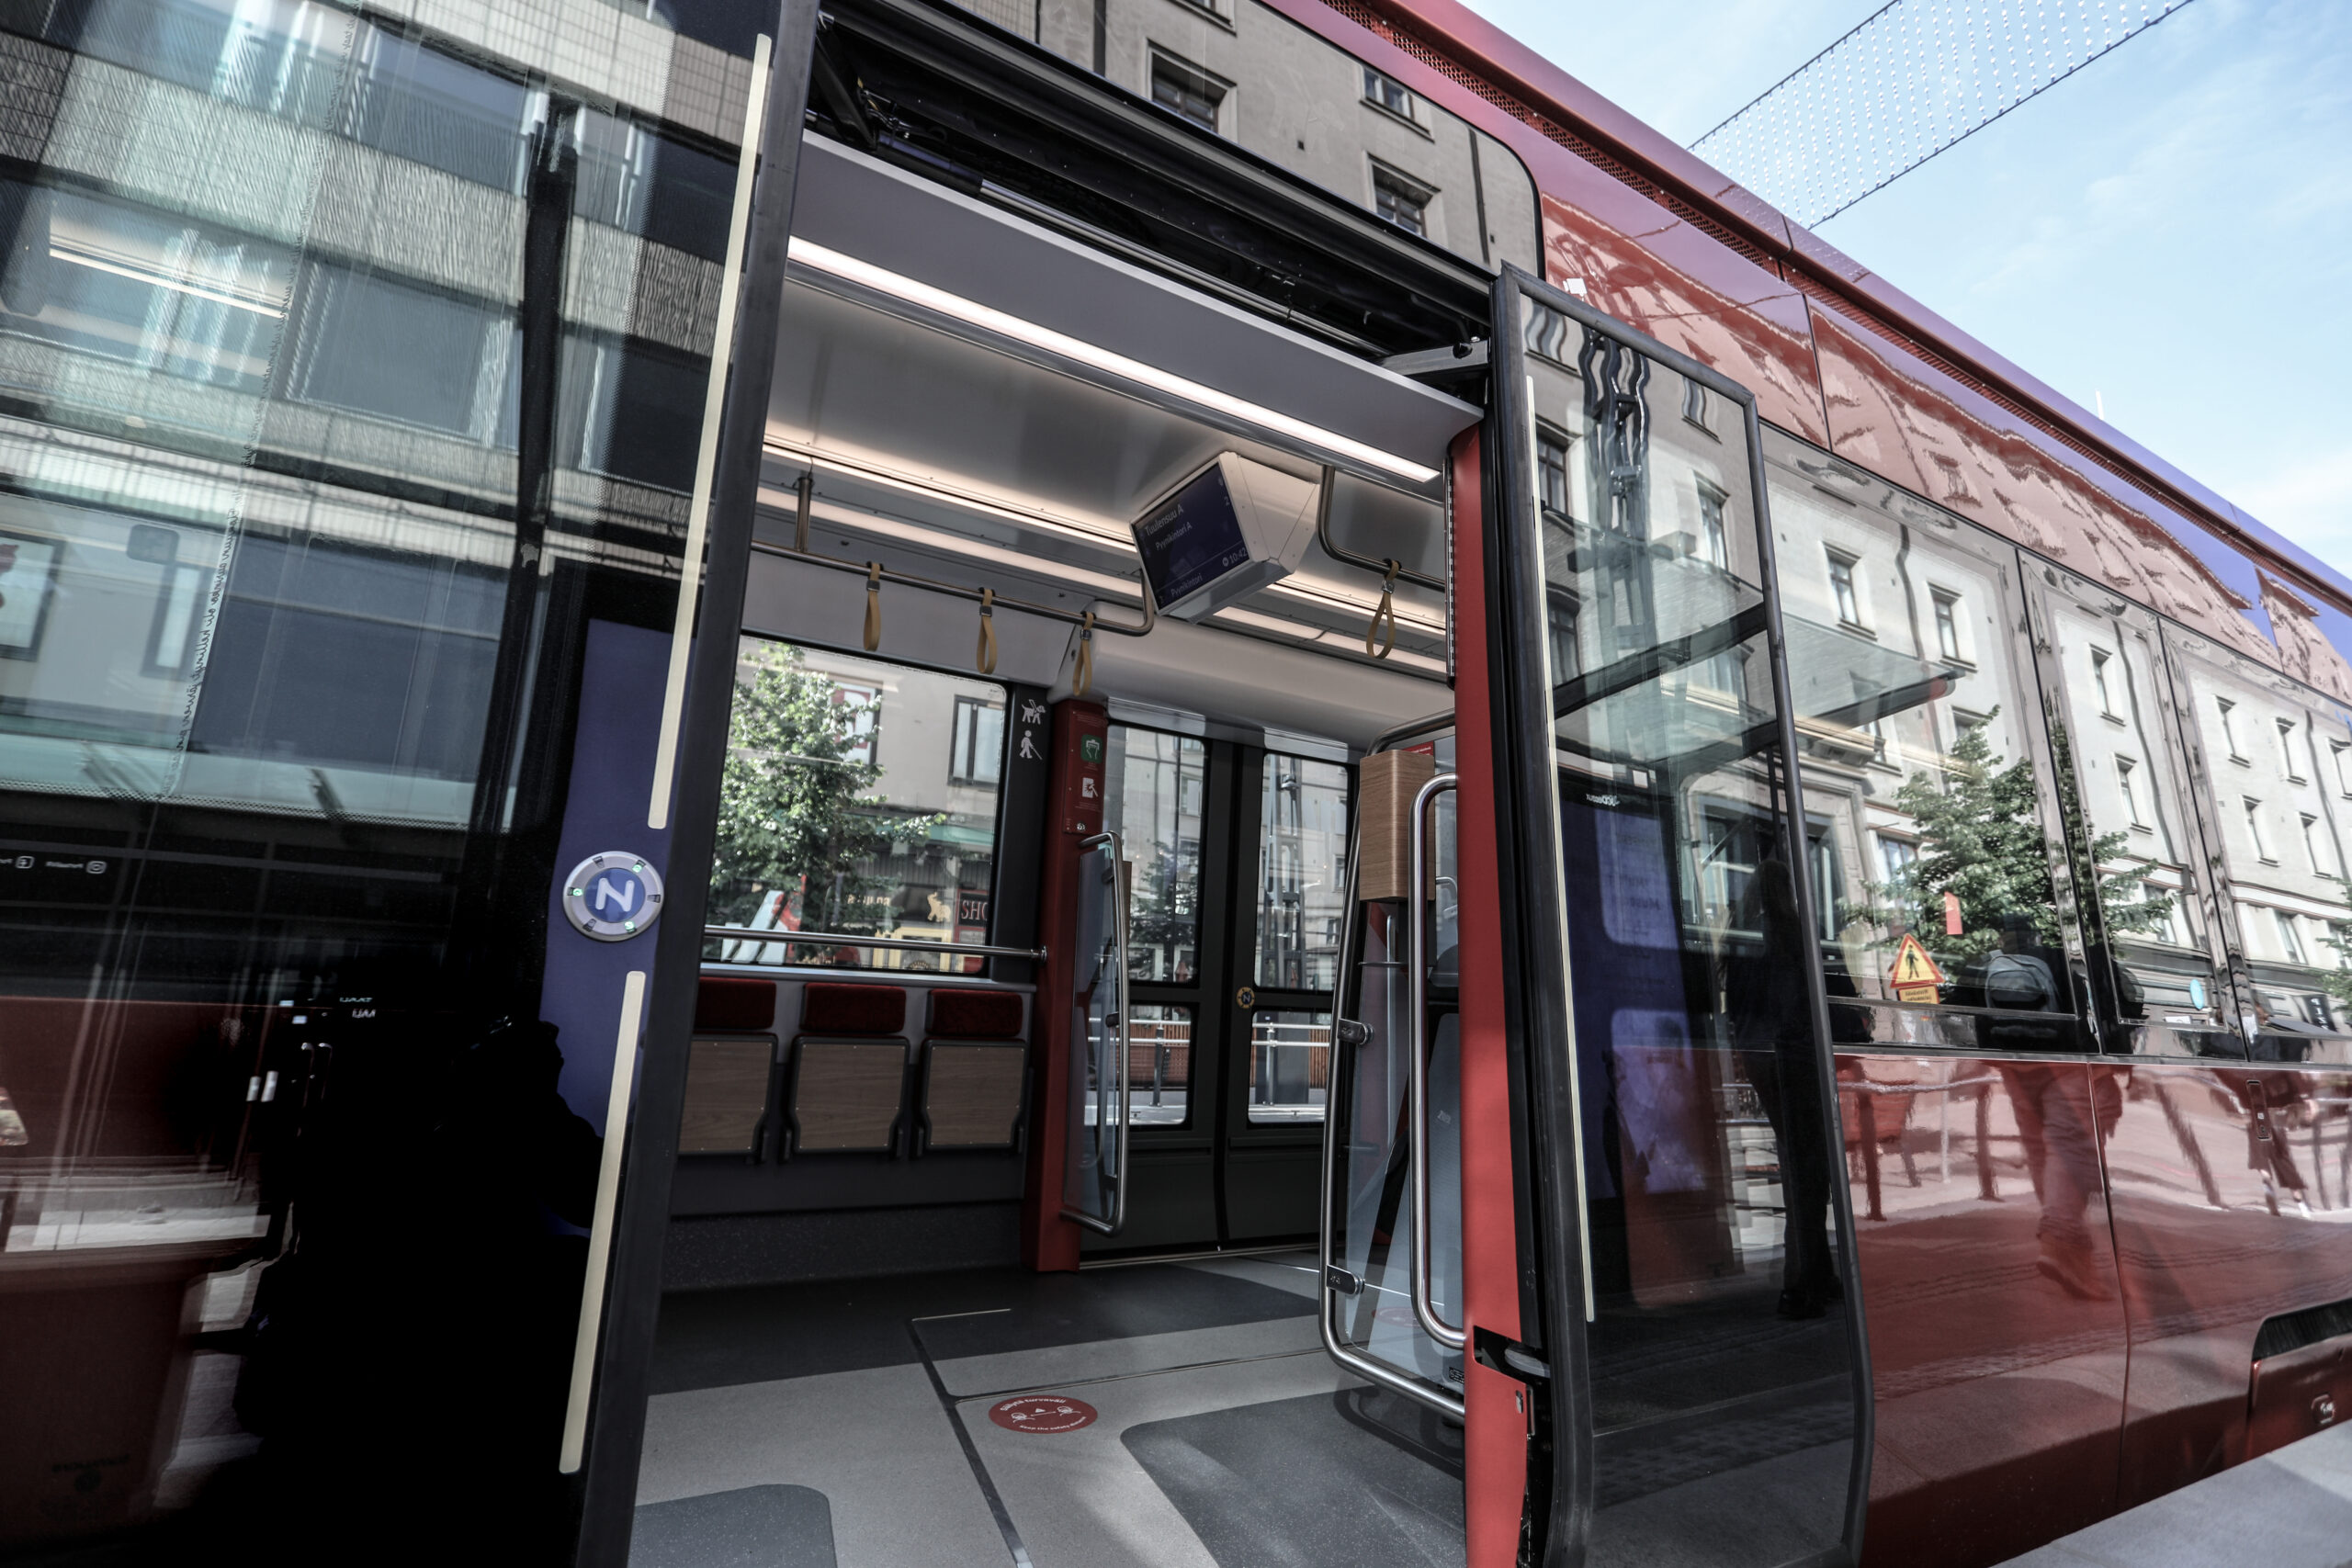 Tampere City's trams include 320 door seals, all of which were made by FinnProfiles